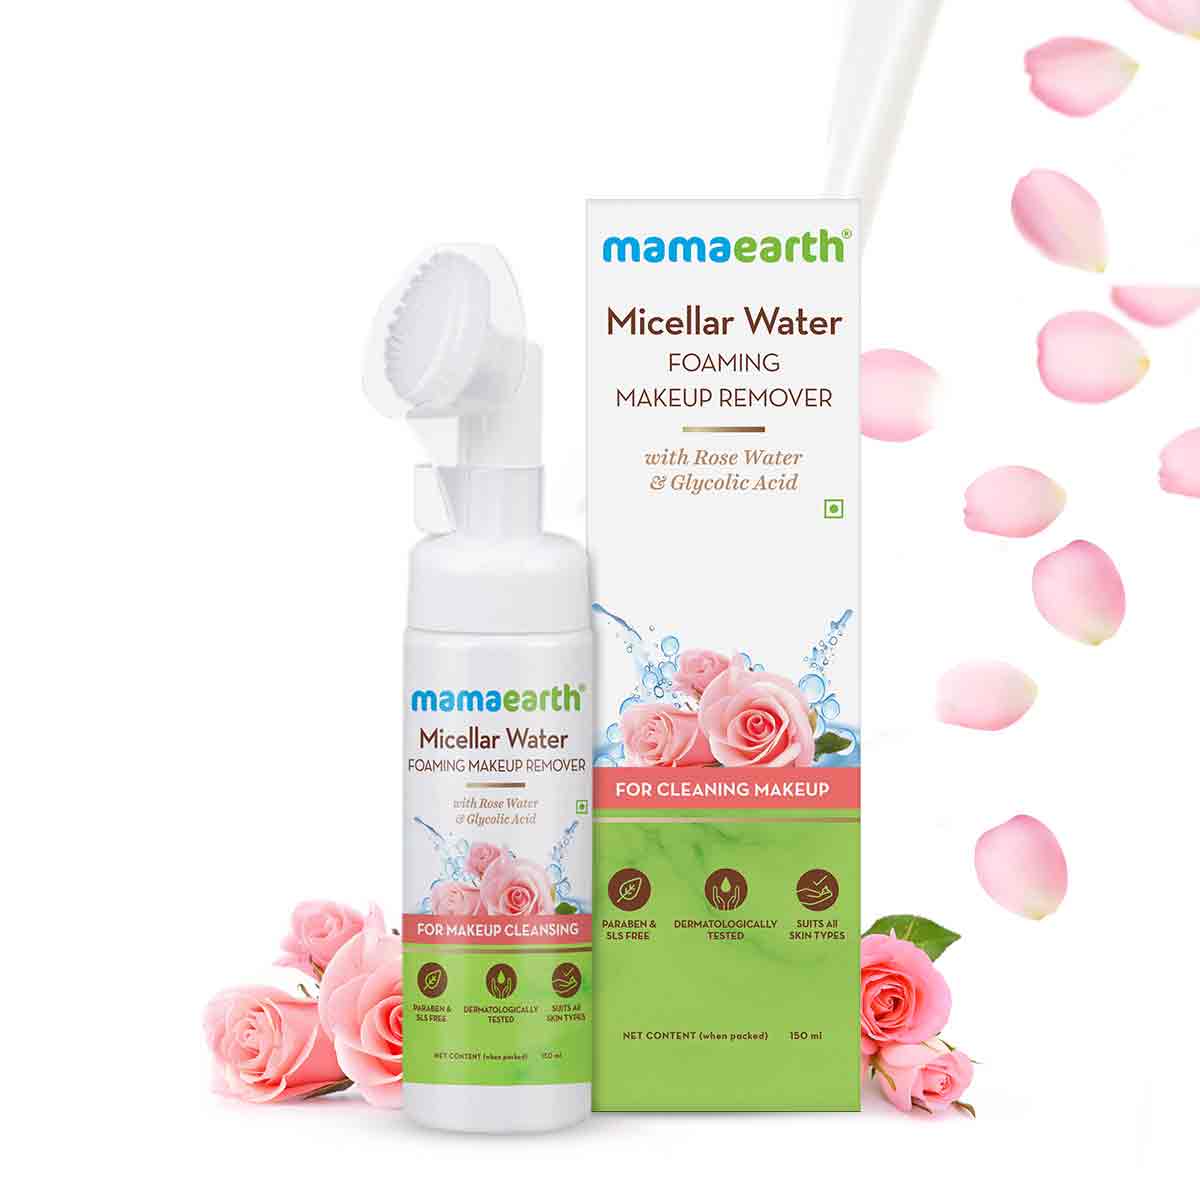 Mama Earth Micellar Water Makeup Remover with Rose Water Glycolic Acid for Makeup Cleansing